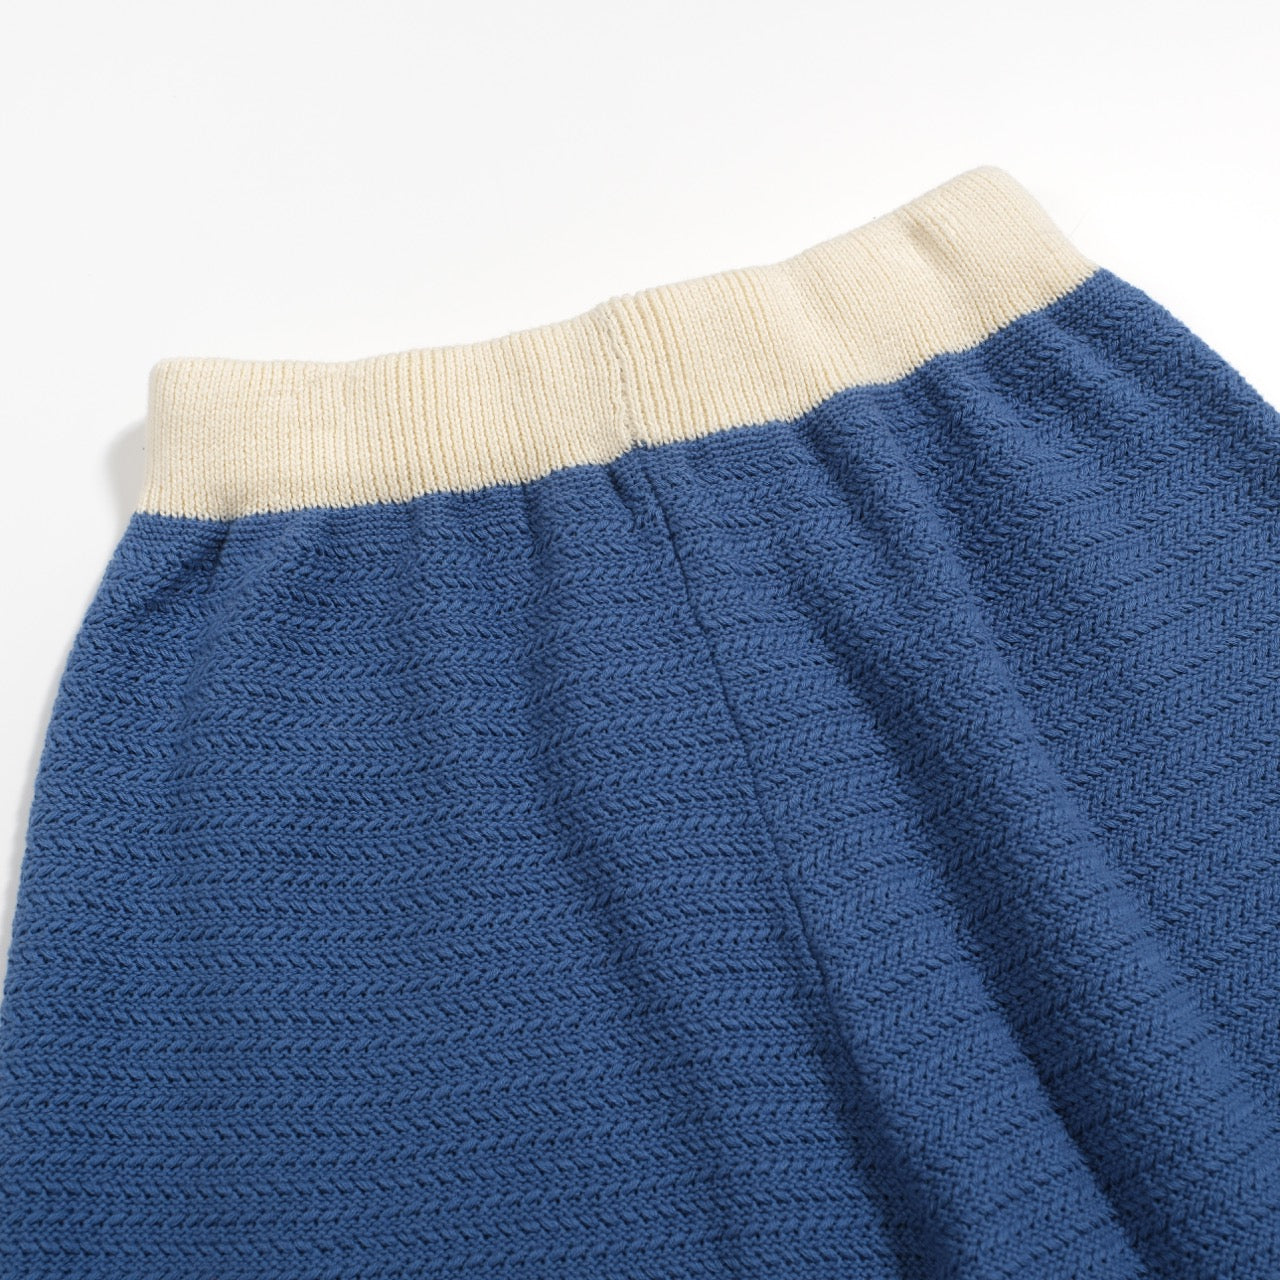 2.0 Men's Blue Knitted Shorts